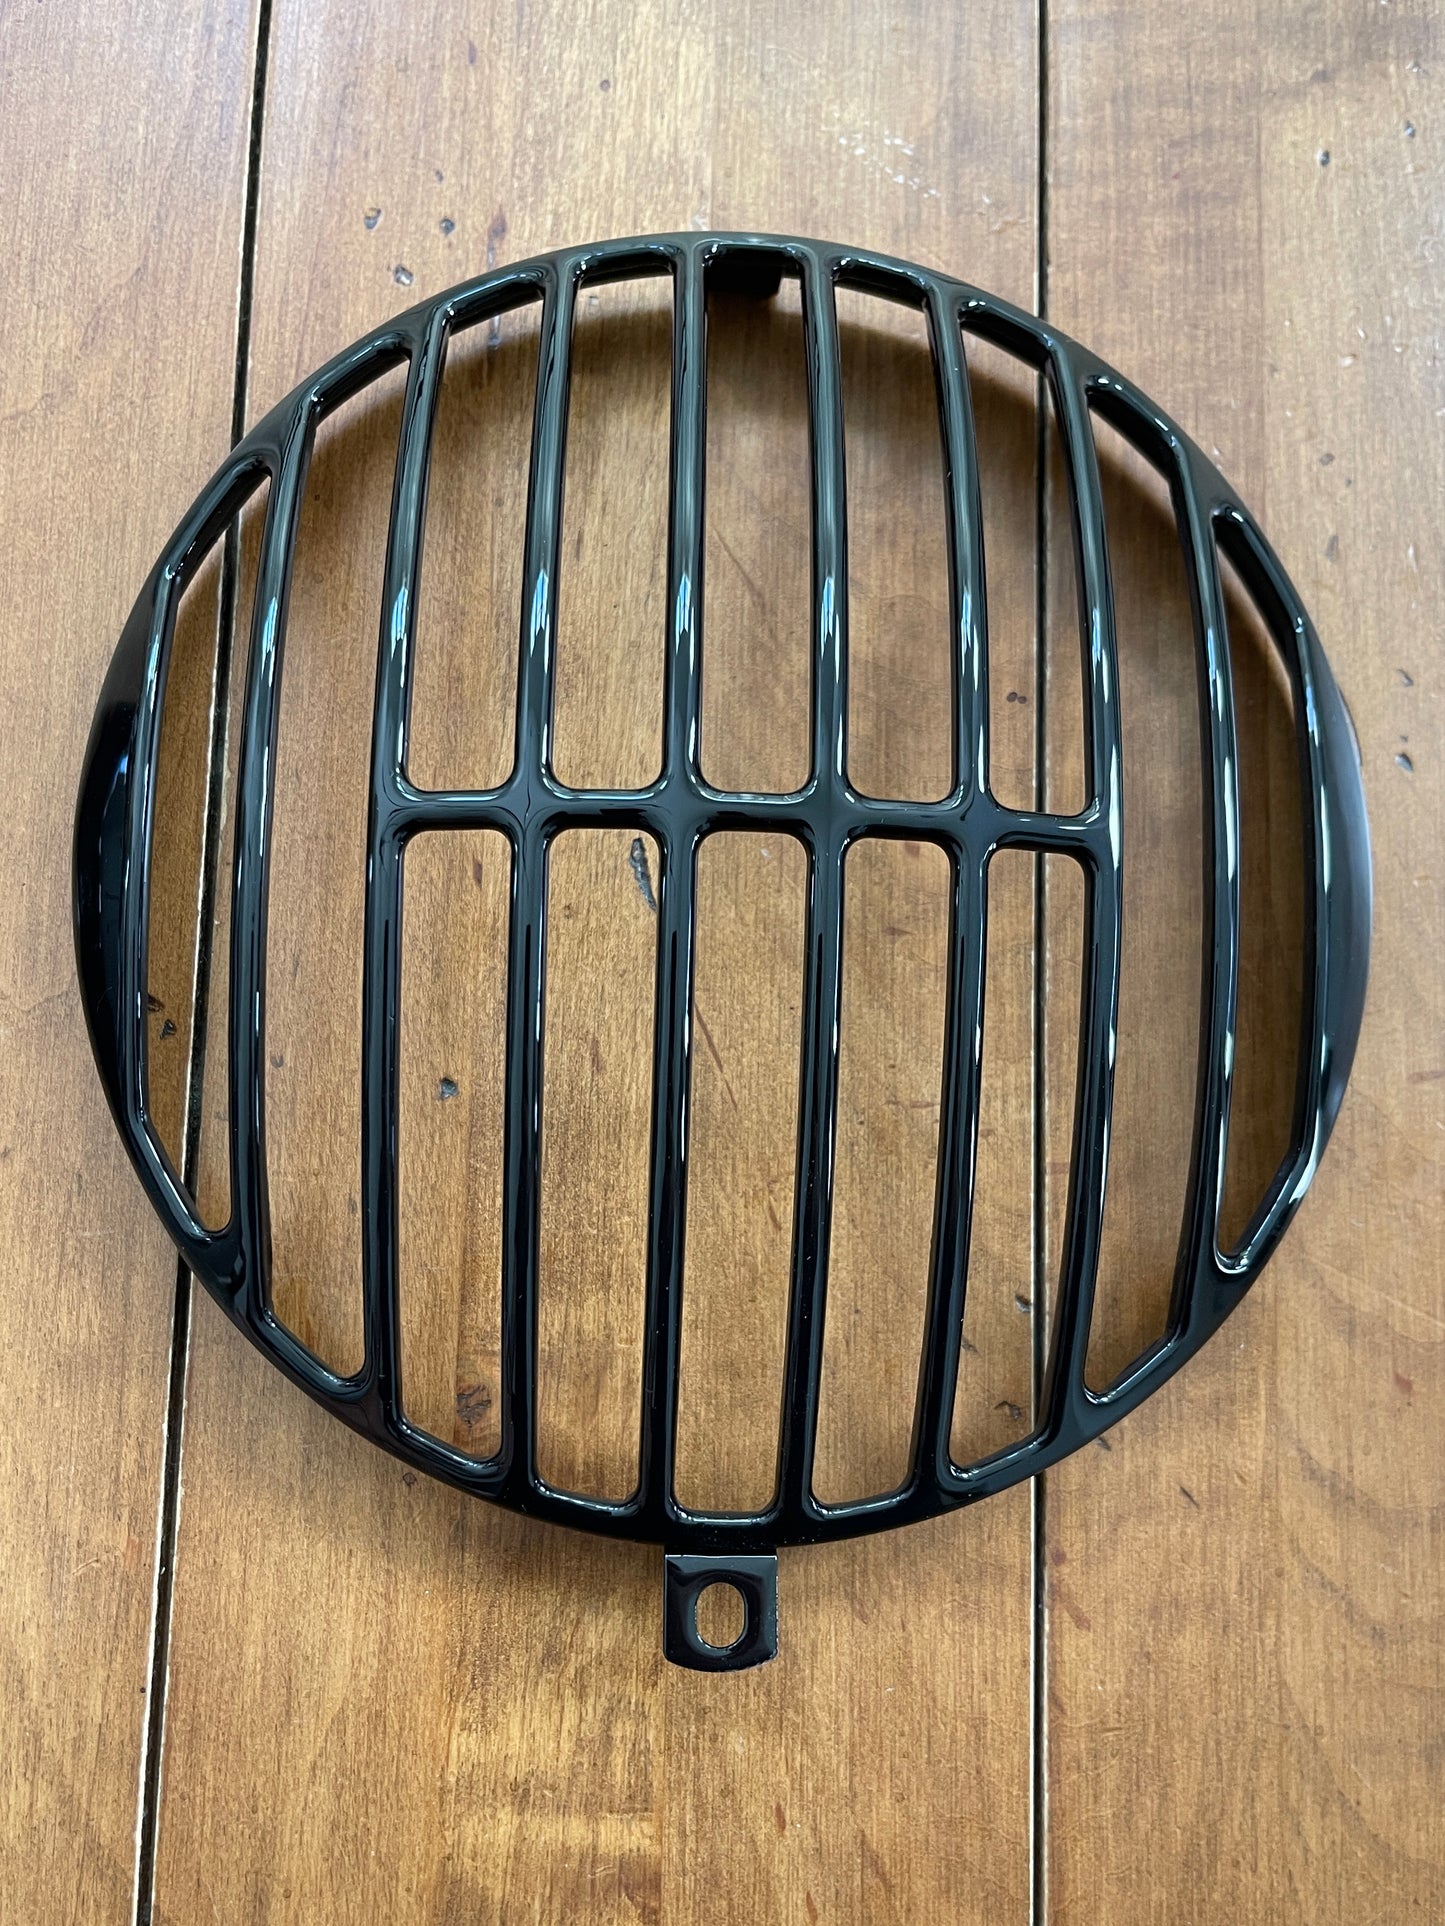 356 Headlight Grilles For Late VW’s Black